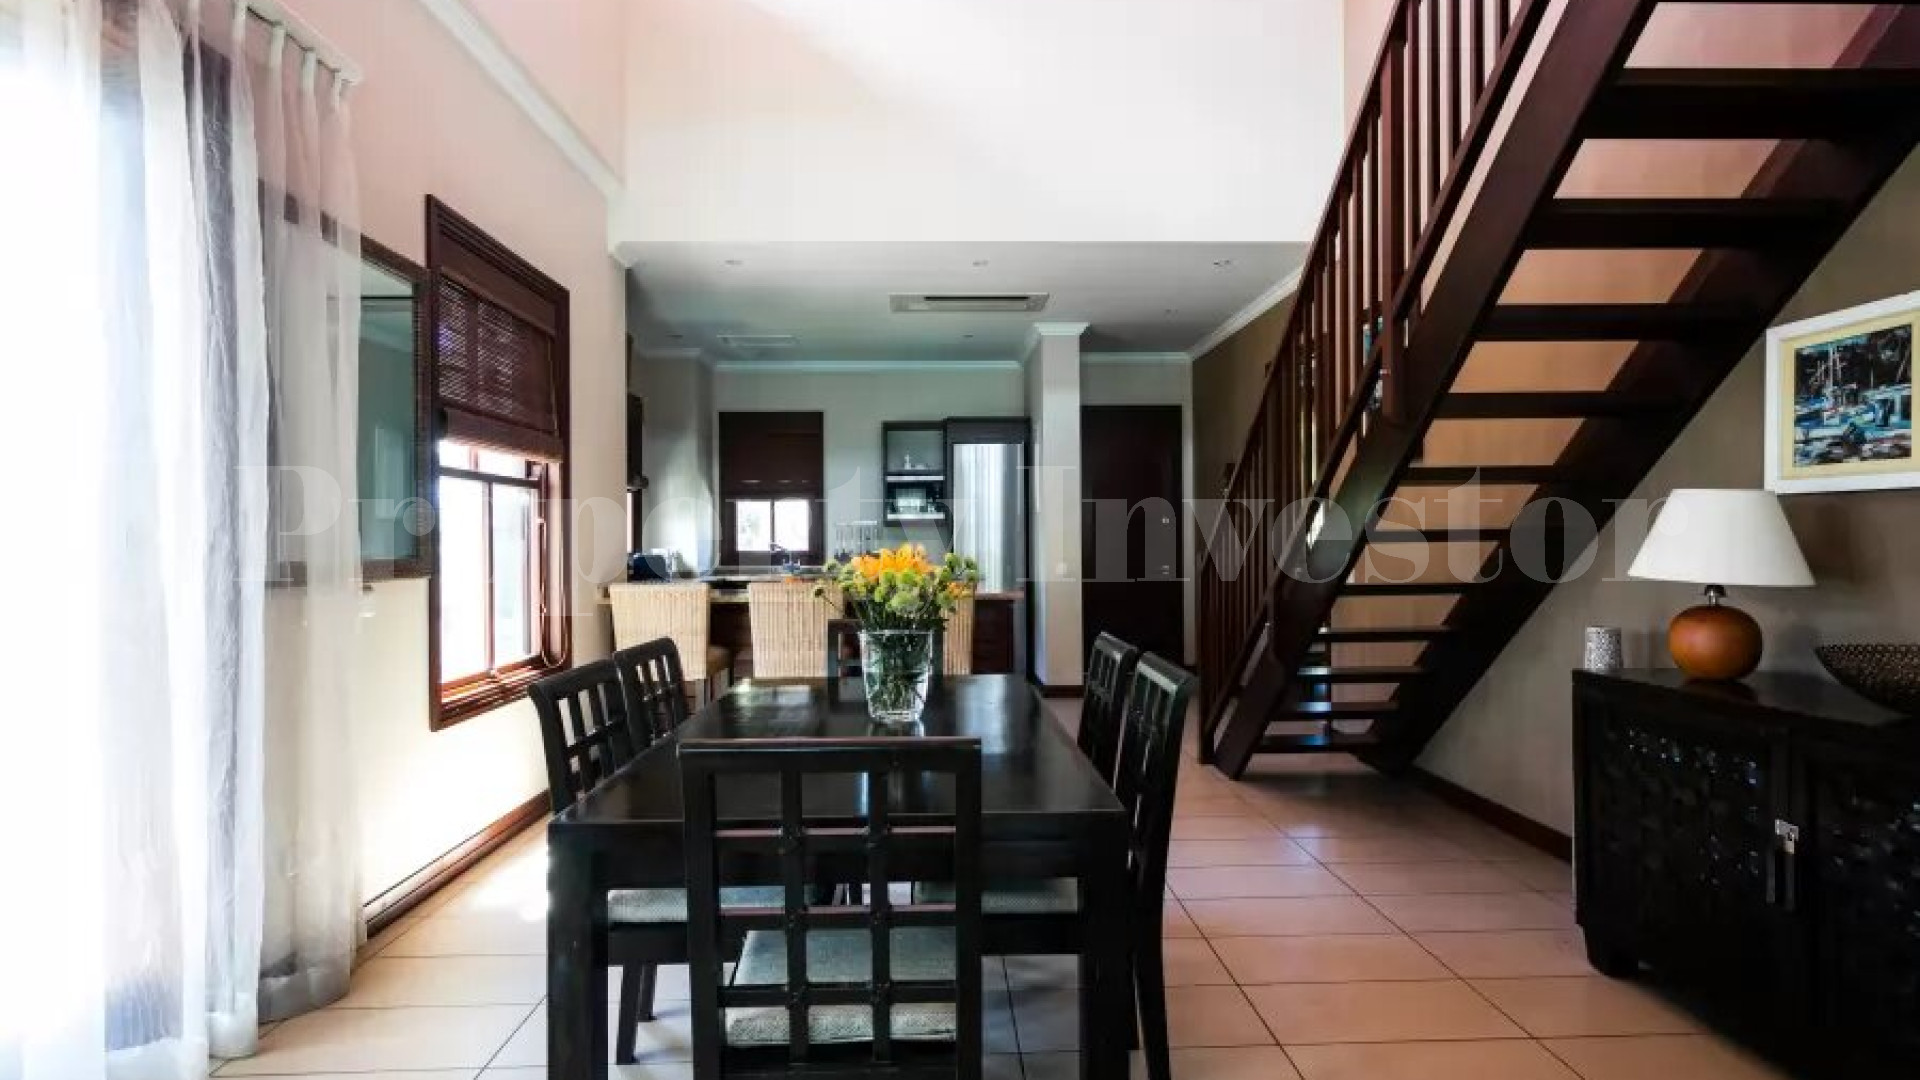 Beautiful 3 Bedroom Luxury Penthouse Apartment with Amazing Balconies for Sale on Eden Island, Seychelles